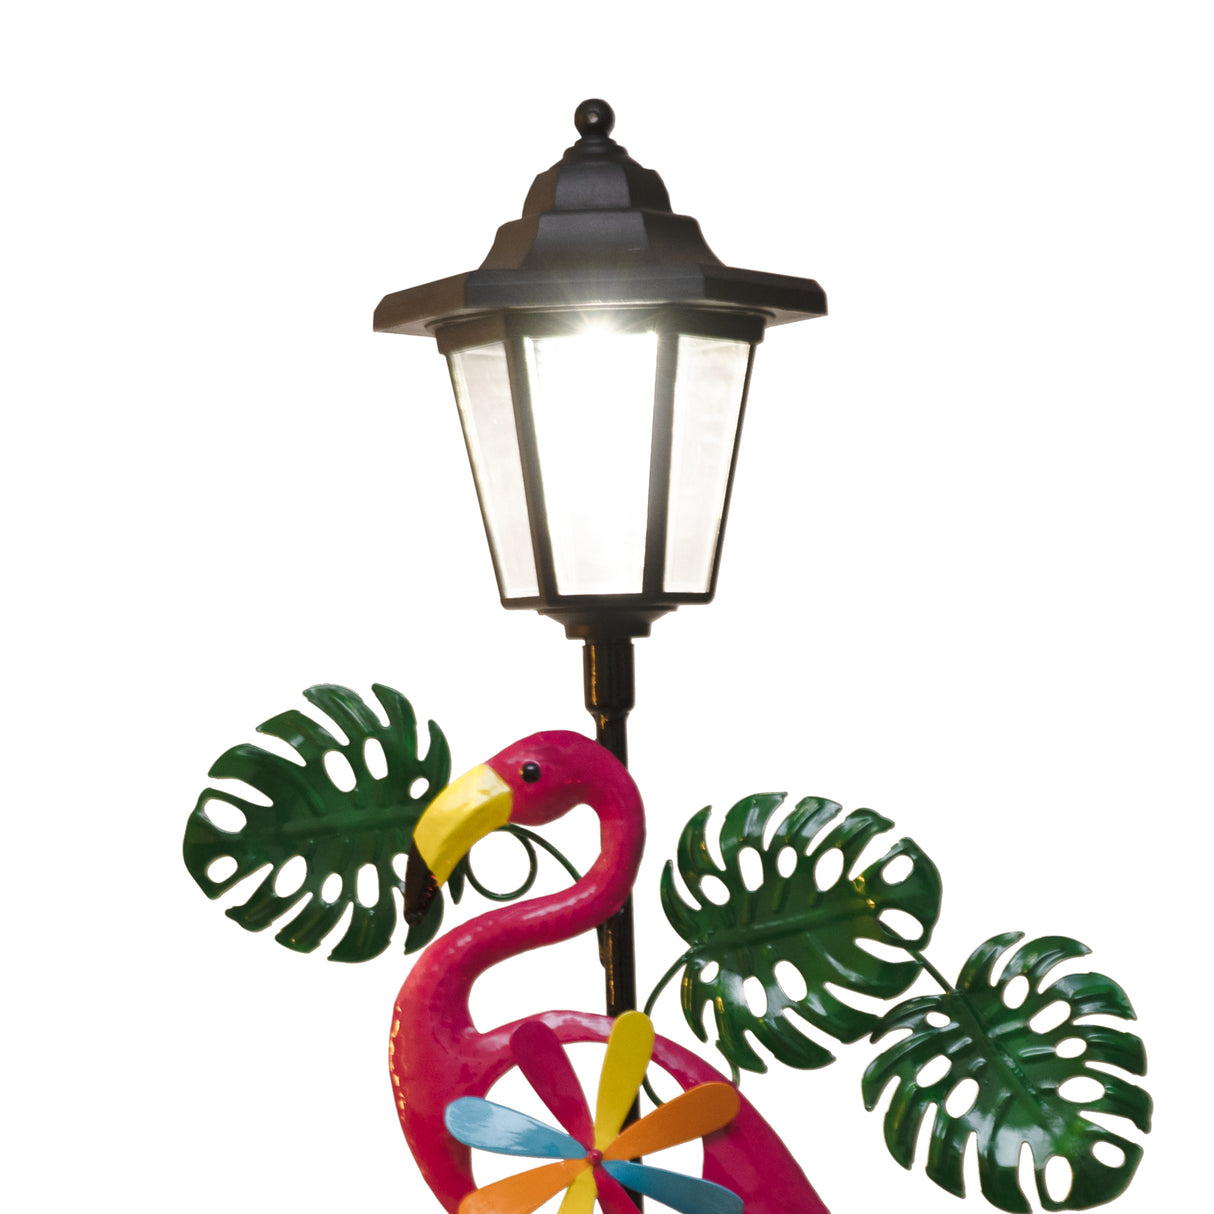 Frog and Flamingo Welcome Sign Solar Garden Stake